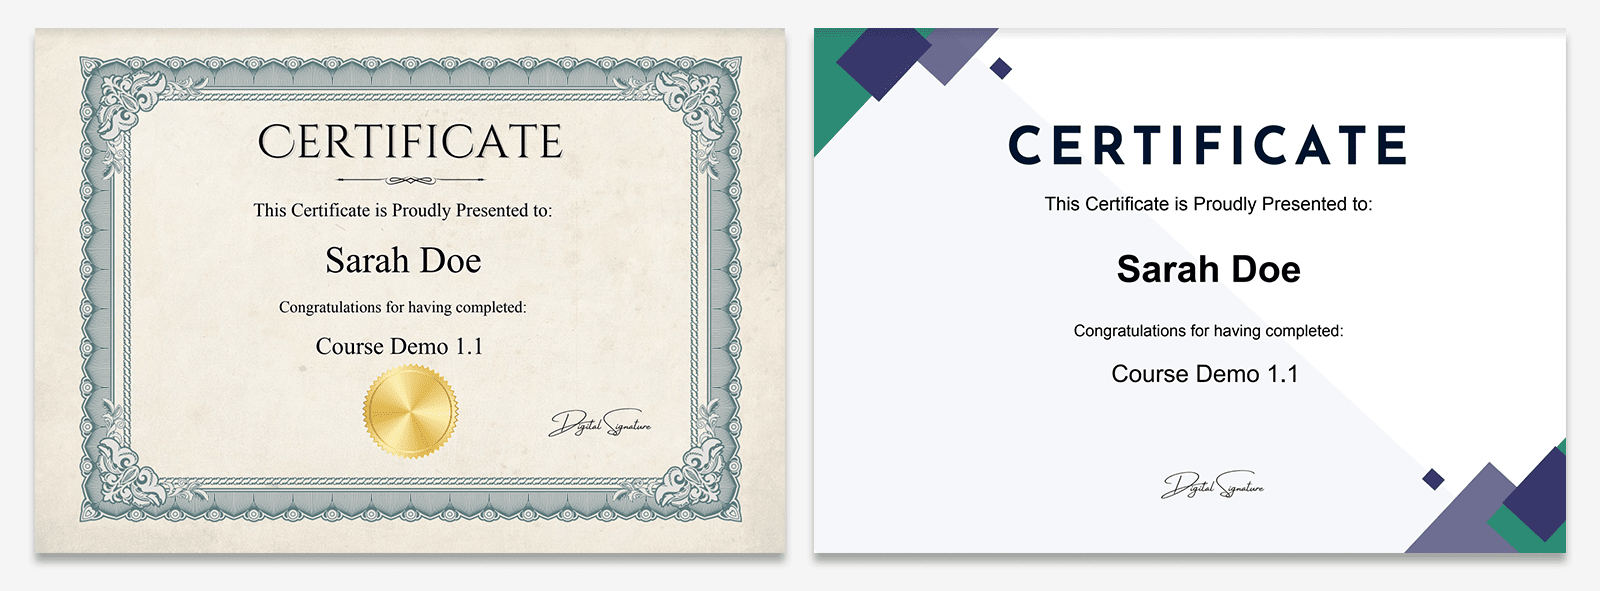 how-to-generate-digital-course-certificates-in-moodle-4-certificate-examples